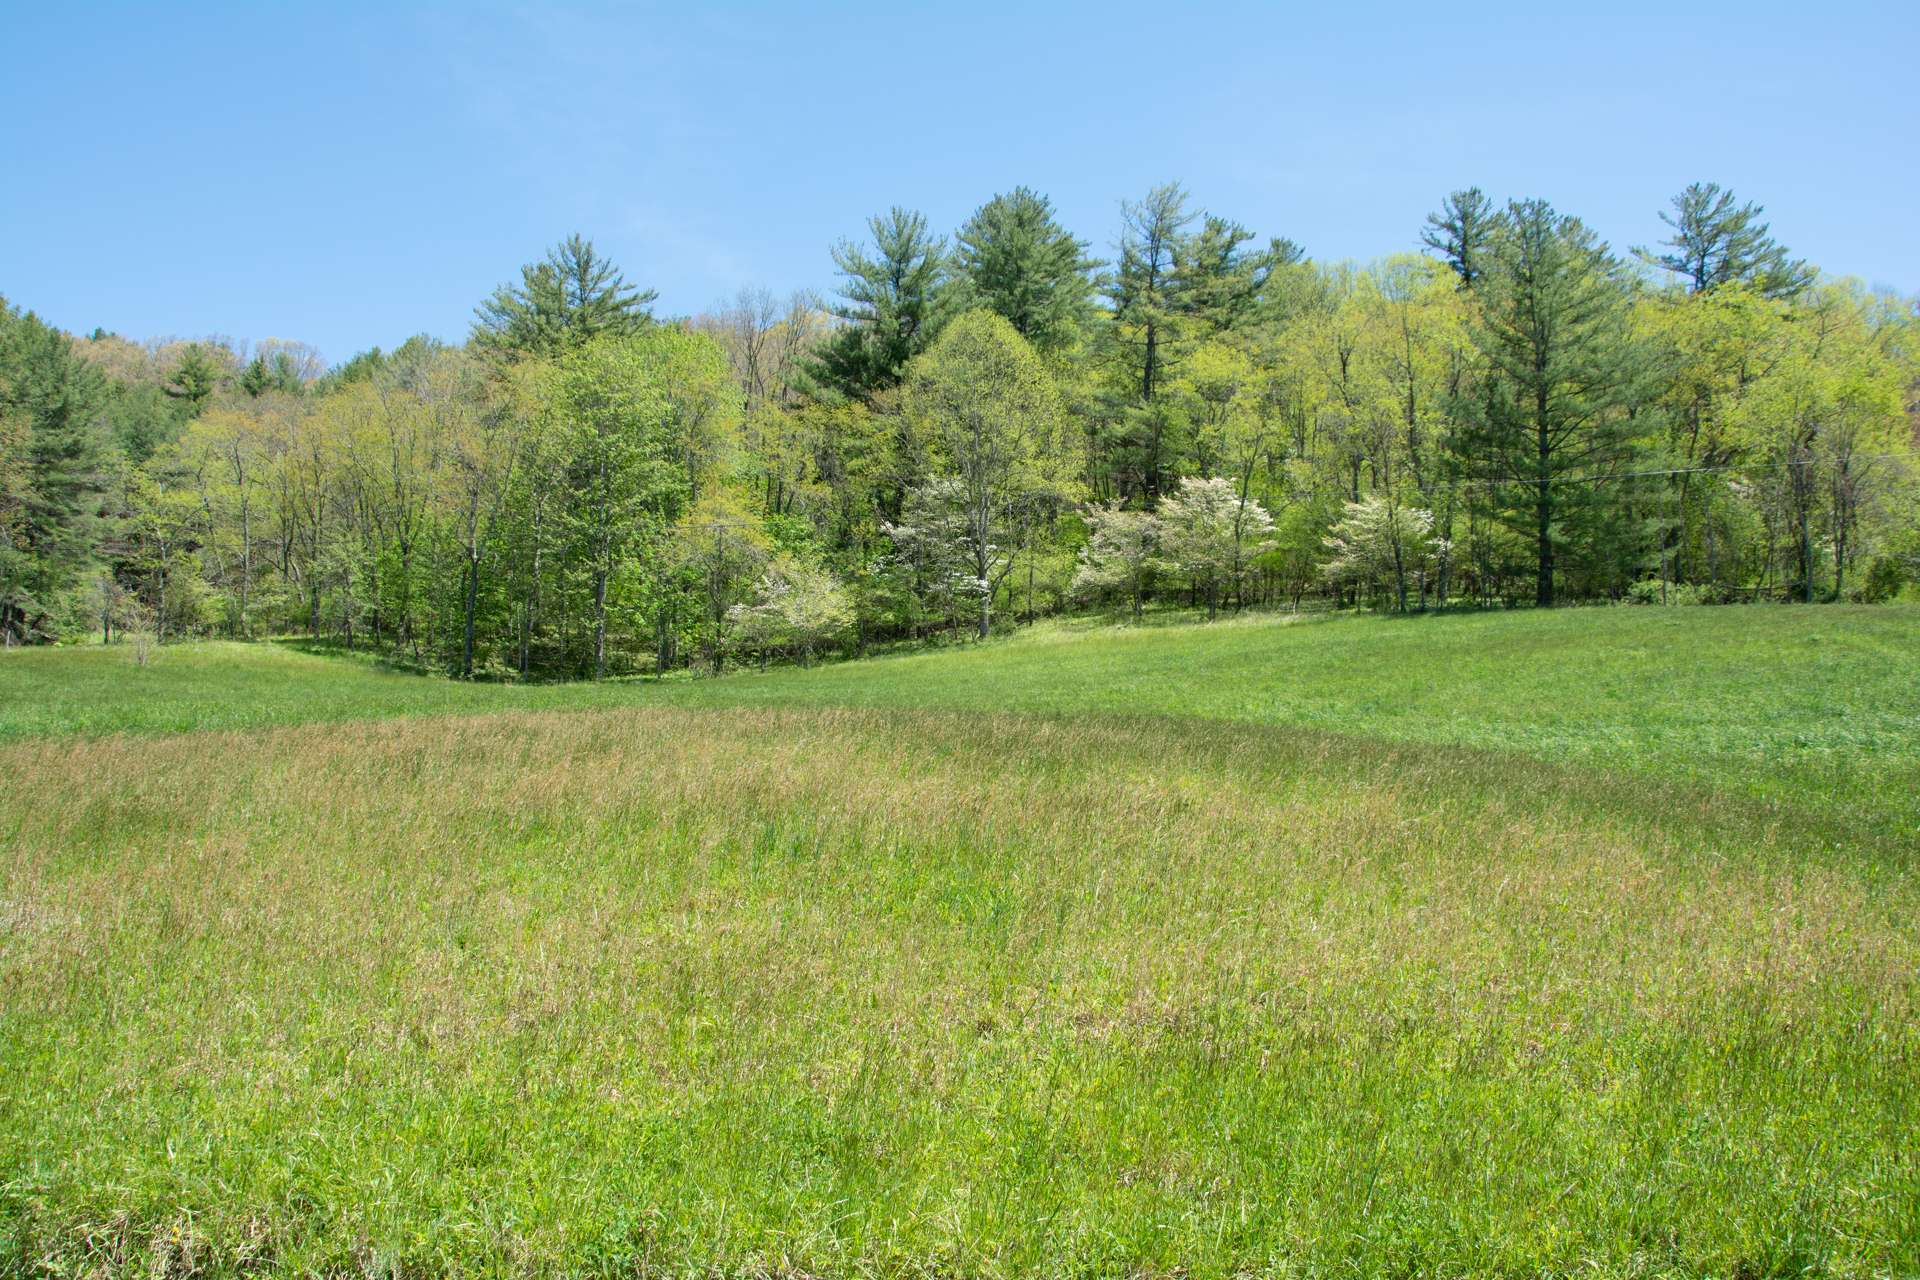 Behind the home site, the property is wooded hillside and a habitat to lots of wildlife.